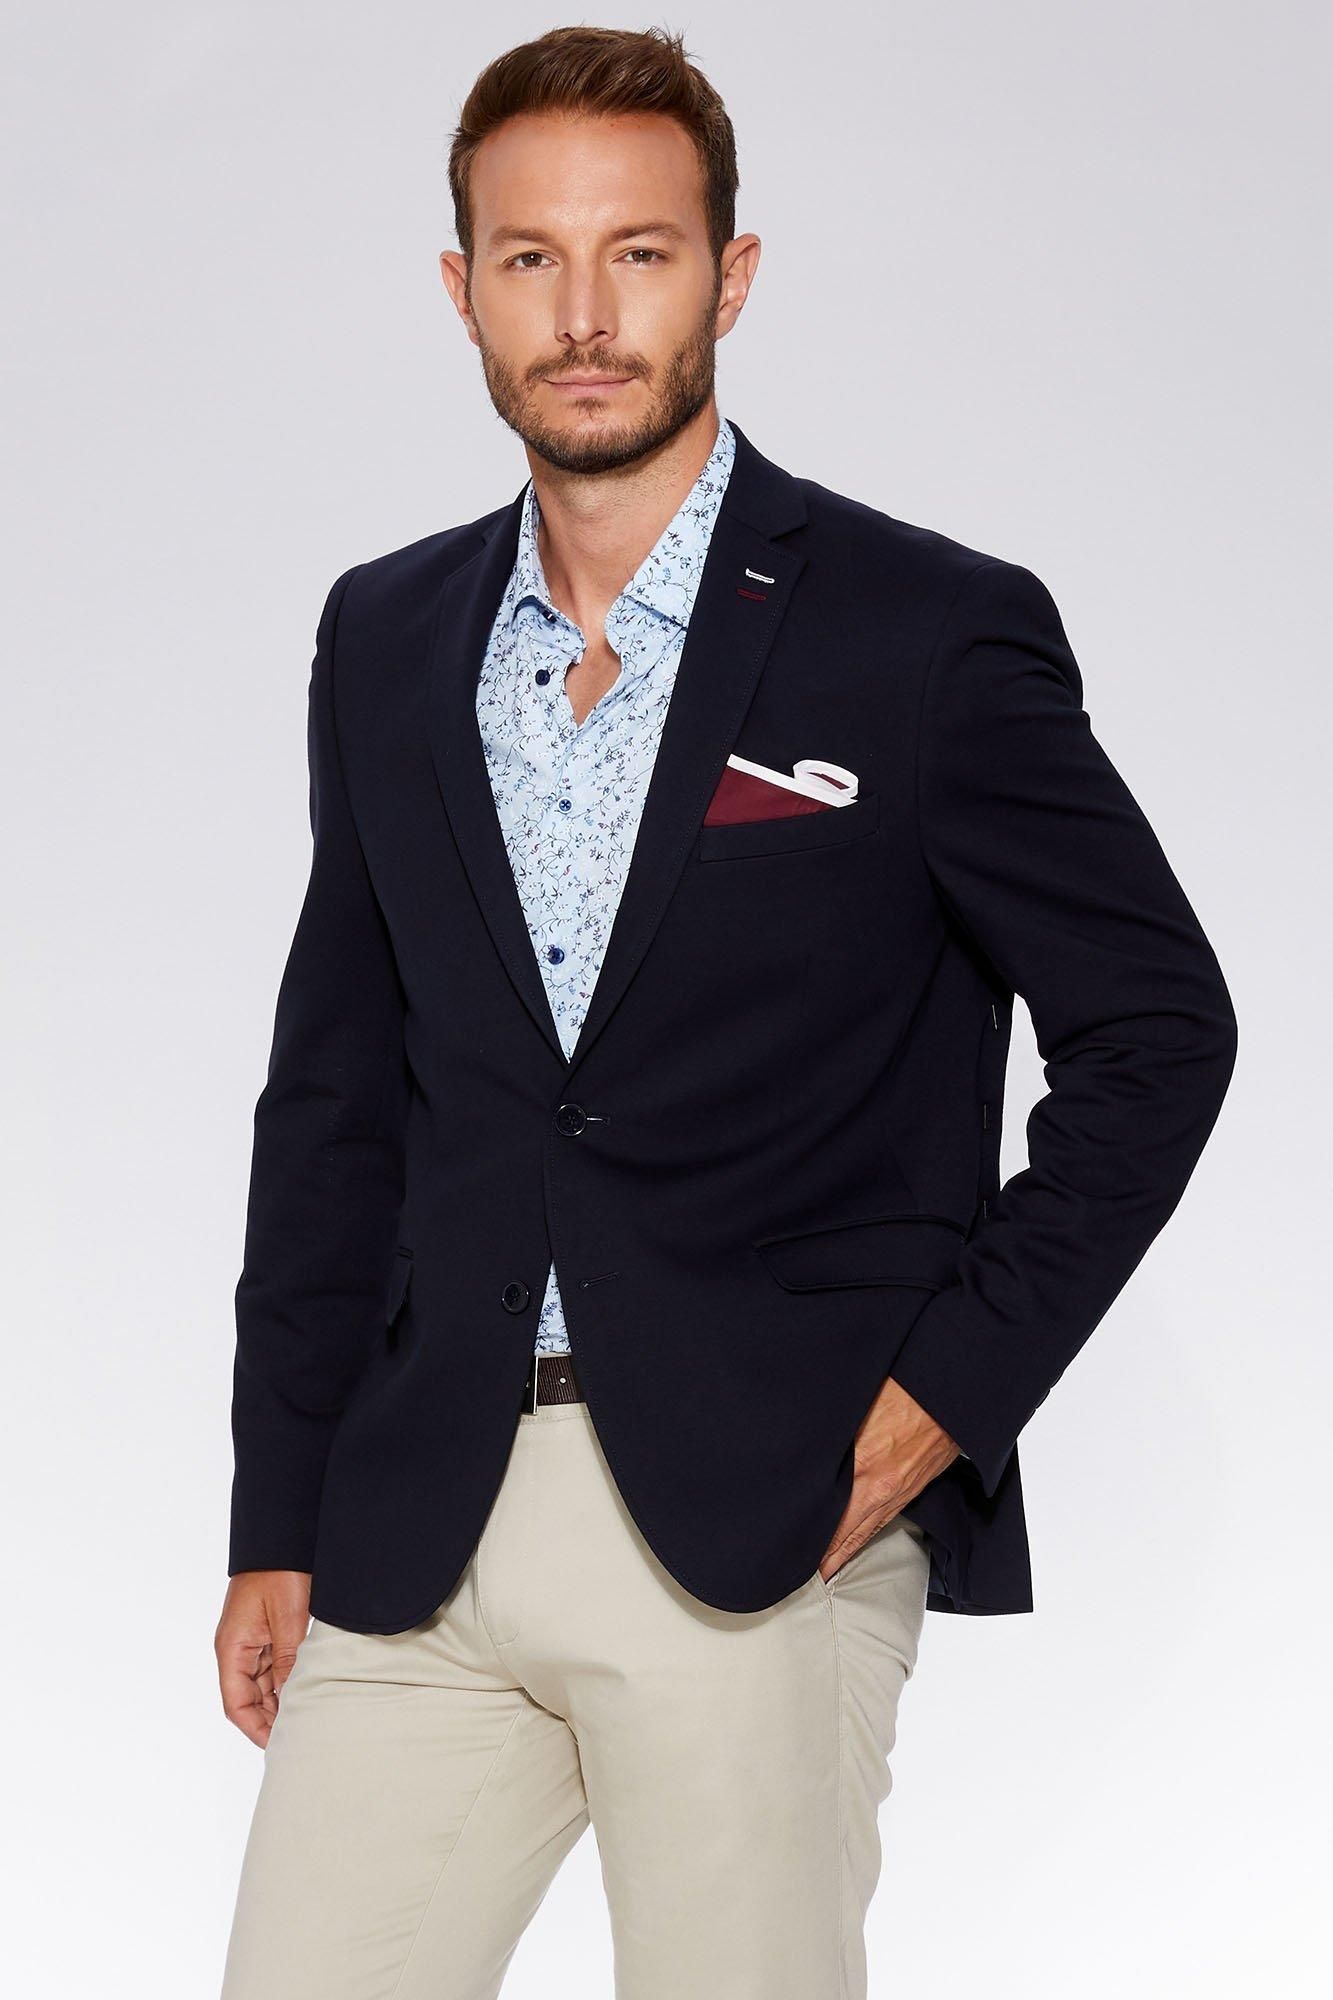 Pocket Square  	Double vented back  	Breast and functional pockets  	Notch lapel  	Double button opening  	Lined with internal pockets  	Cotton - Satin blend fabric  	Slim fit